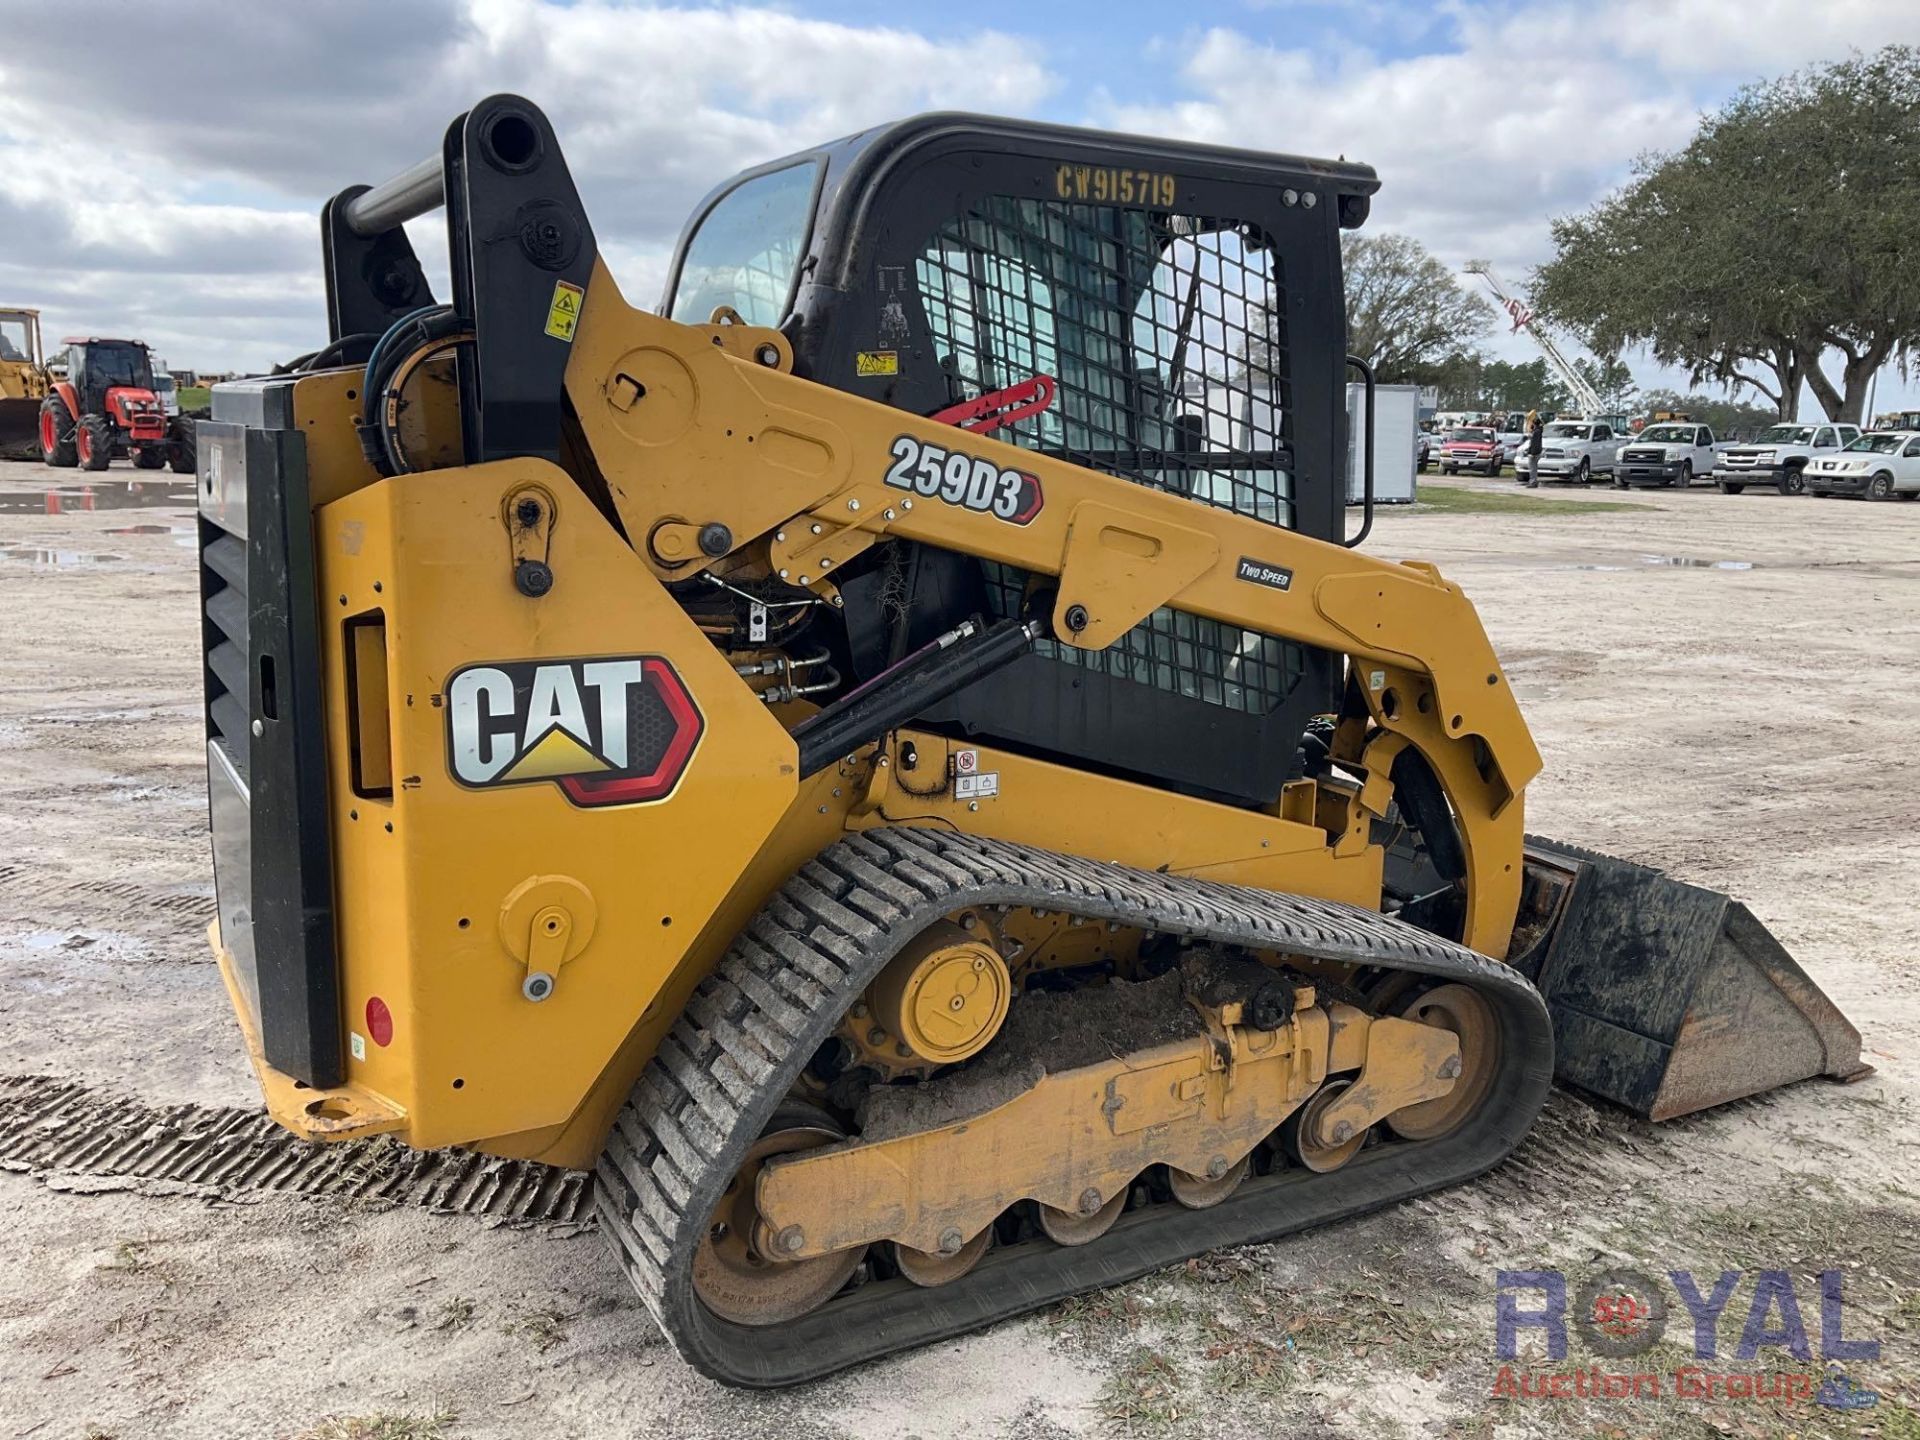 2022 Caterpillar 259D3 Compact Track Loader Skid Steer - Image 3 of 20